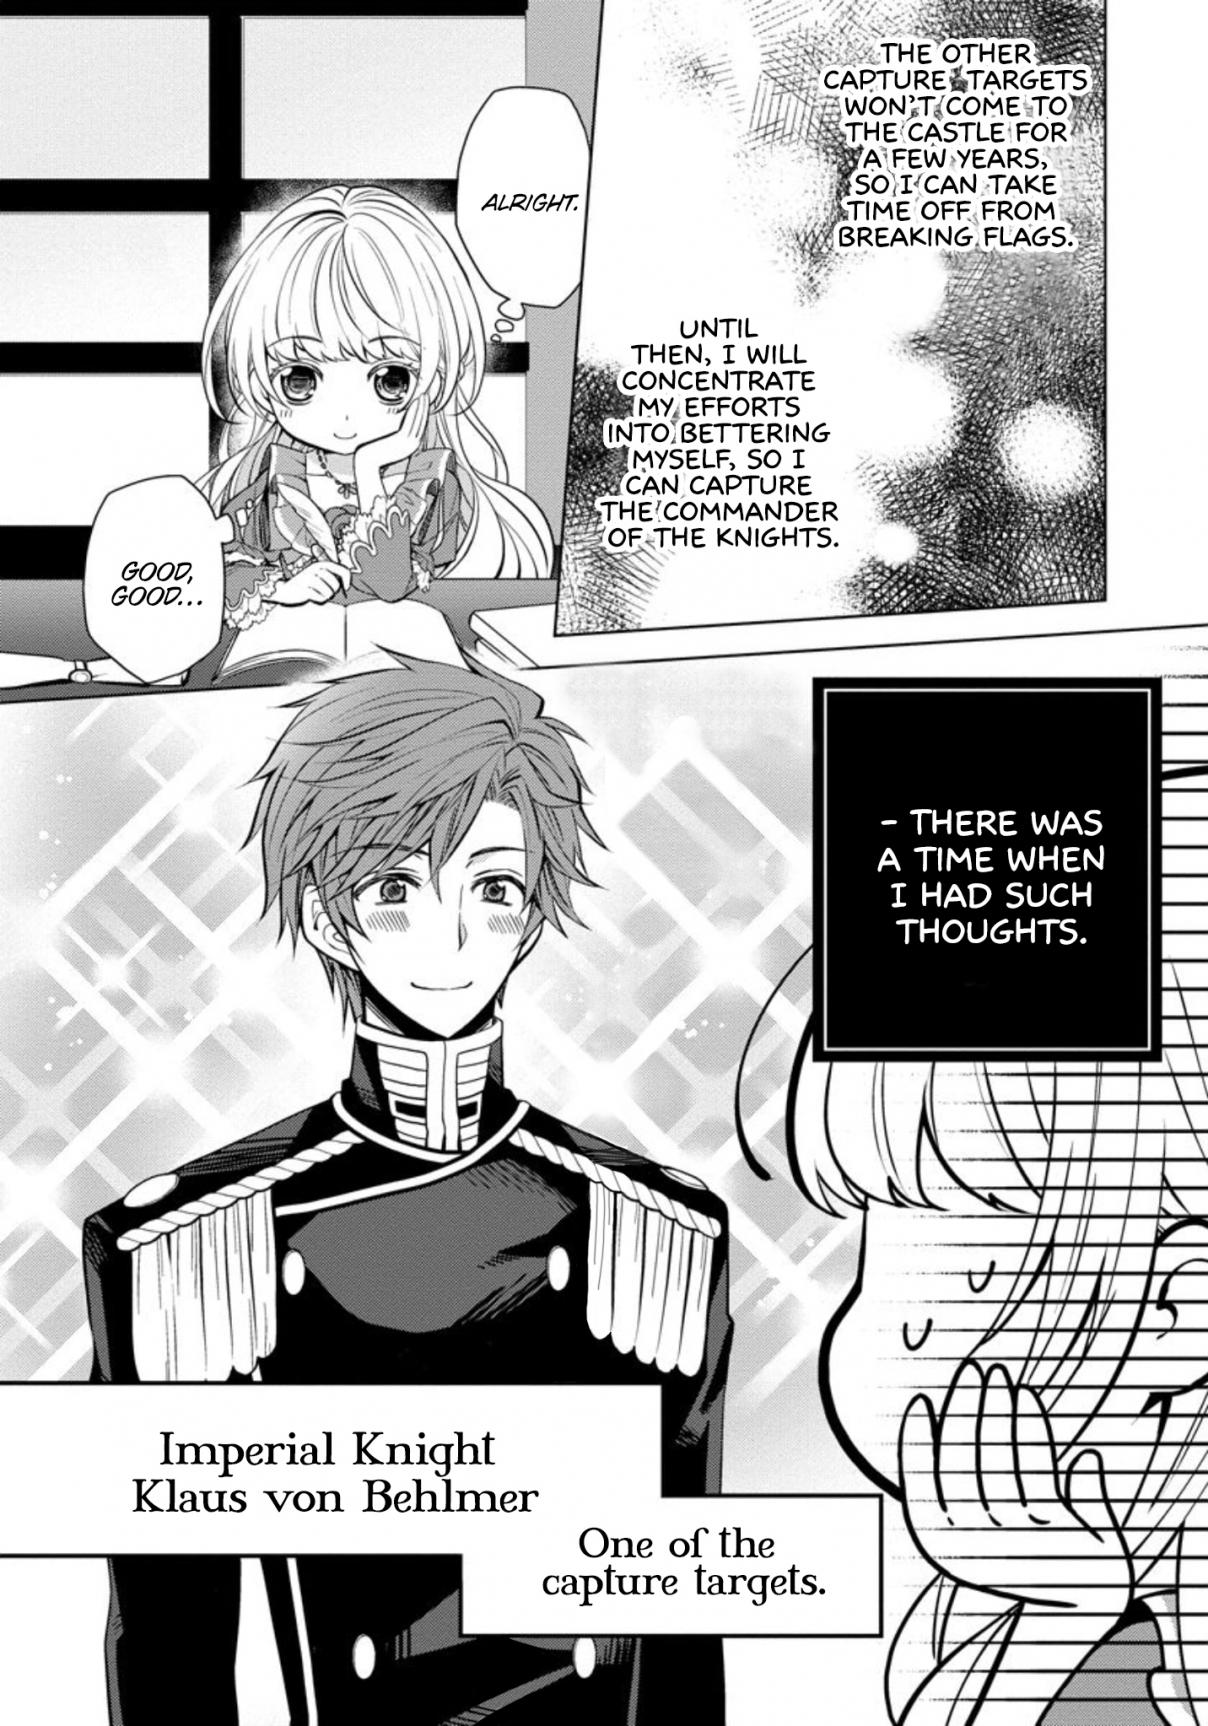 The Reincarnated Princess Strikes Down Flags Today as Well Vol. 1 Ch. 3